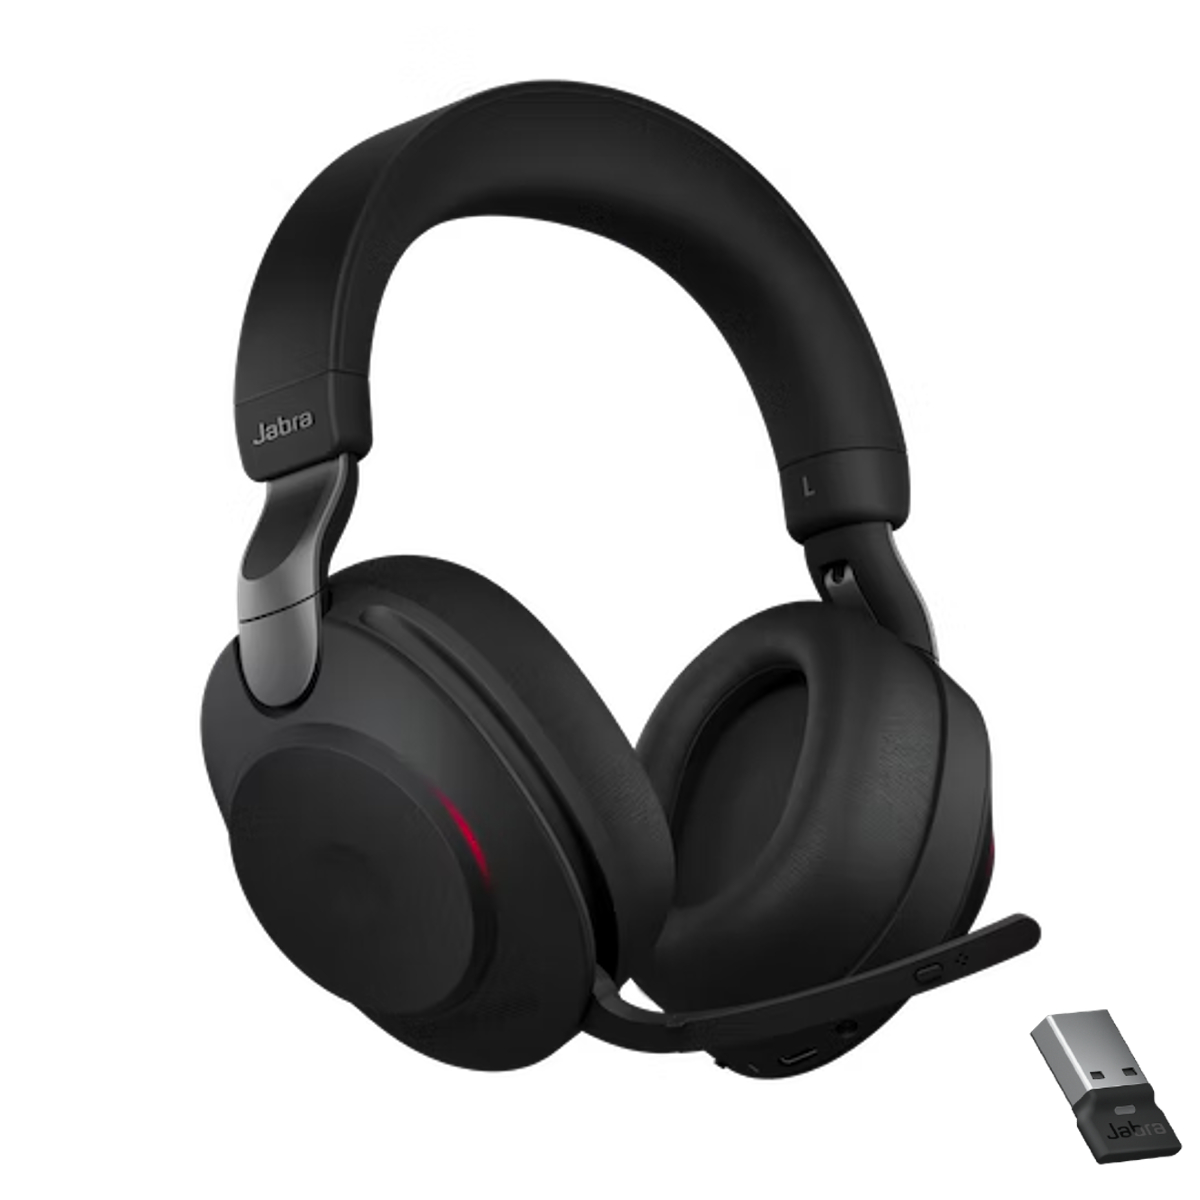 With | Stereo Evolve2 (28599-989-999) UC 380A Bluetooth Headset Adapter |Black Macondo Link | Networks USB-A Jabra 85